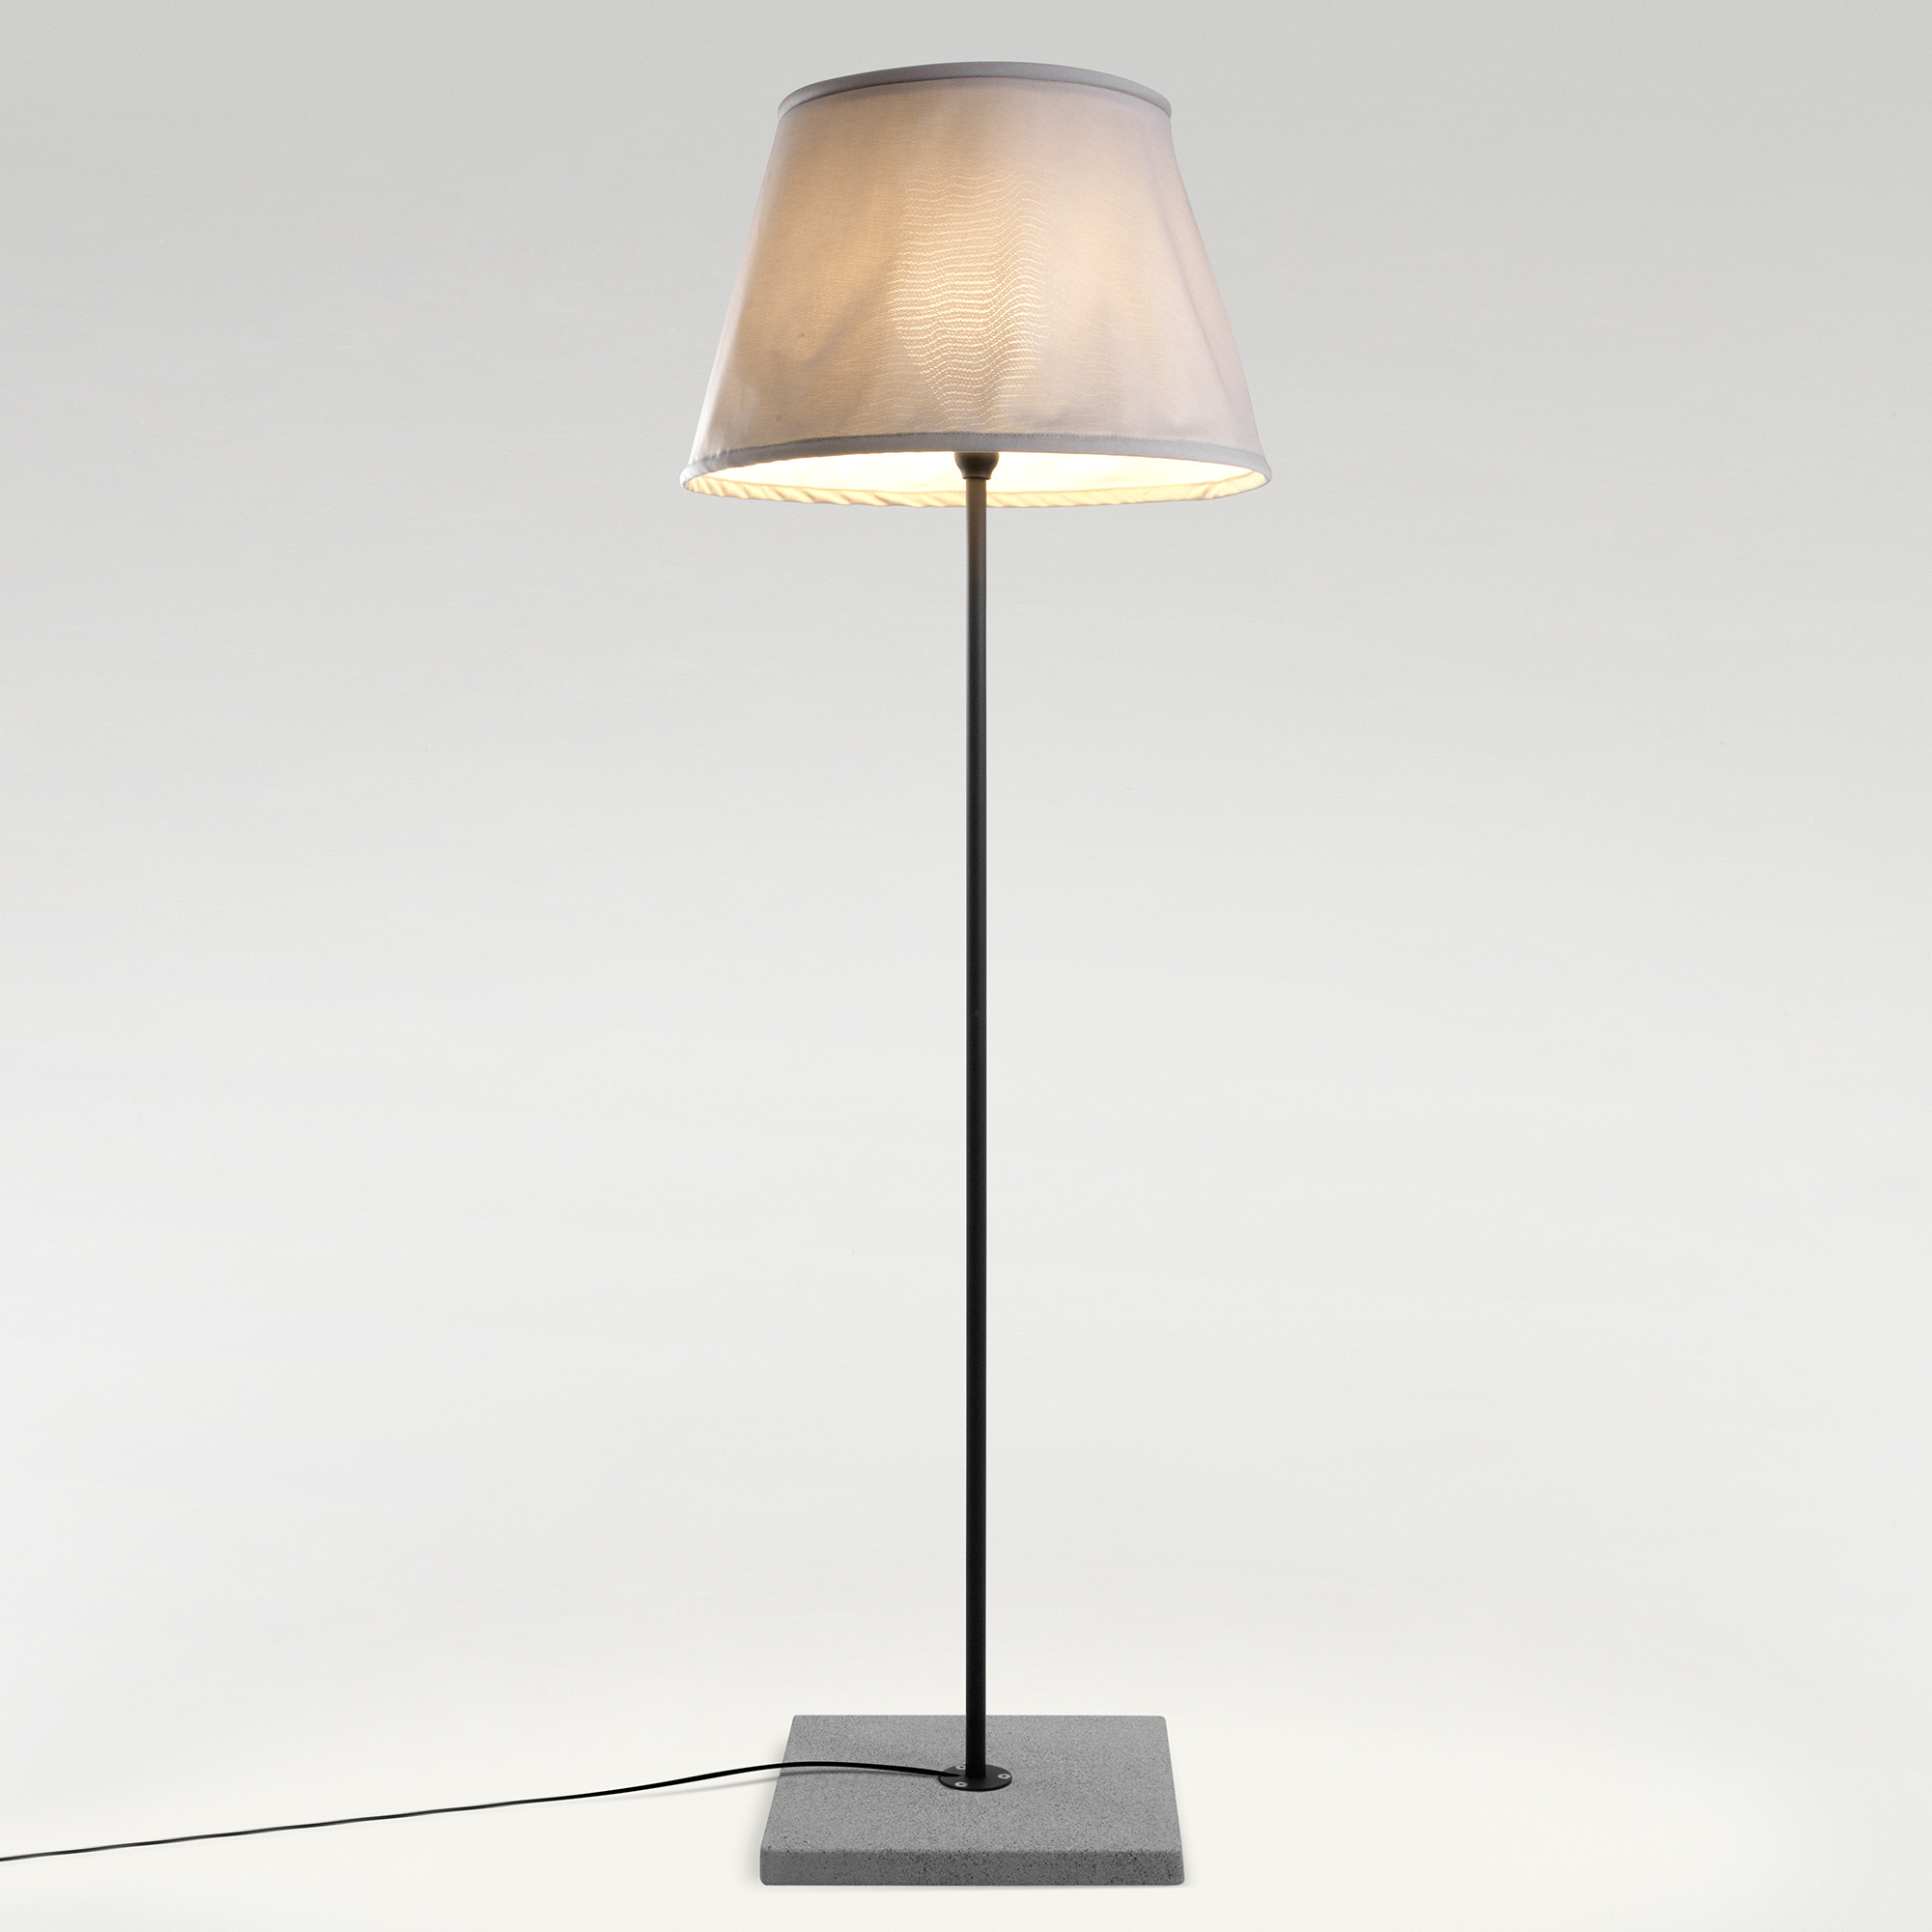 Mt Txl 205 Floor Lamp A605 062, How To Choose A Shade For Floor Lamp